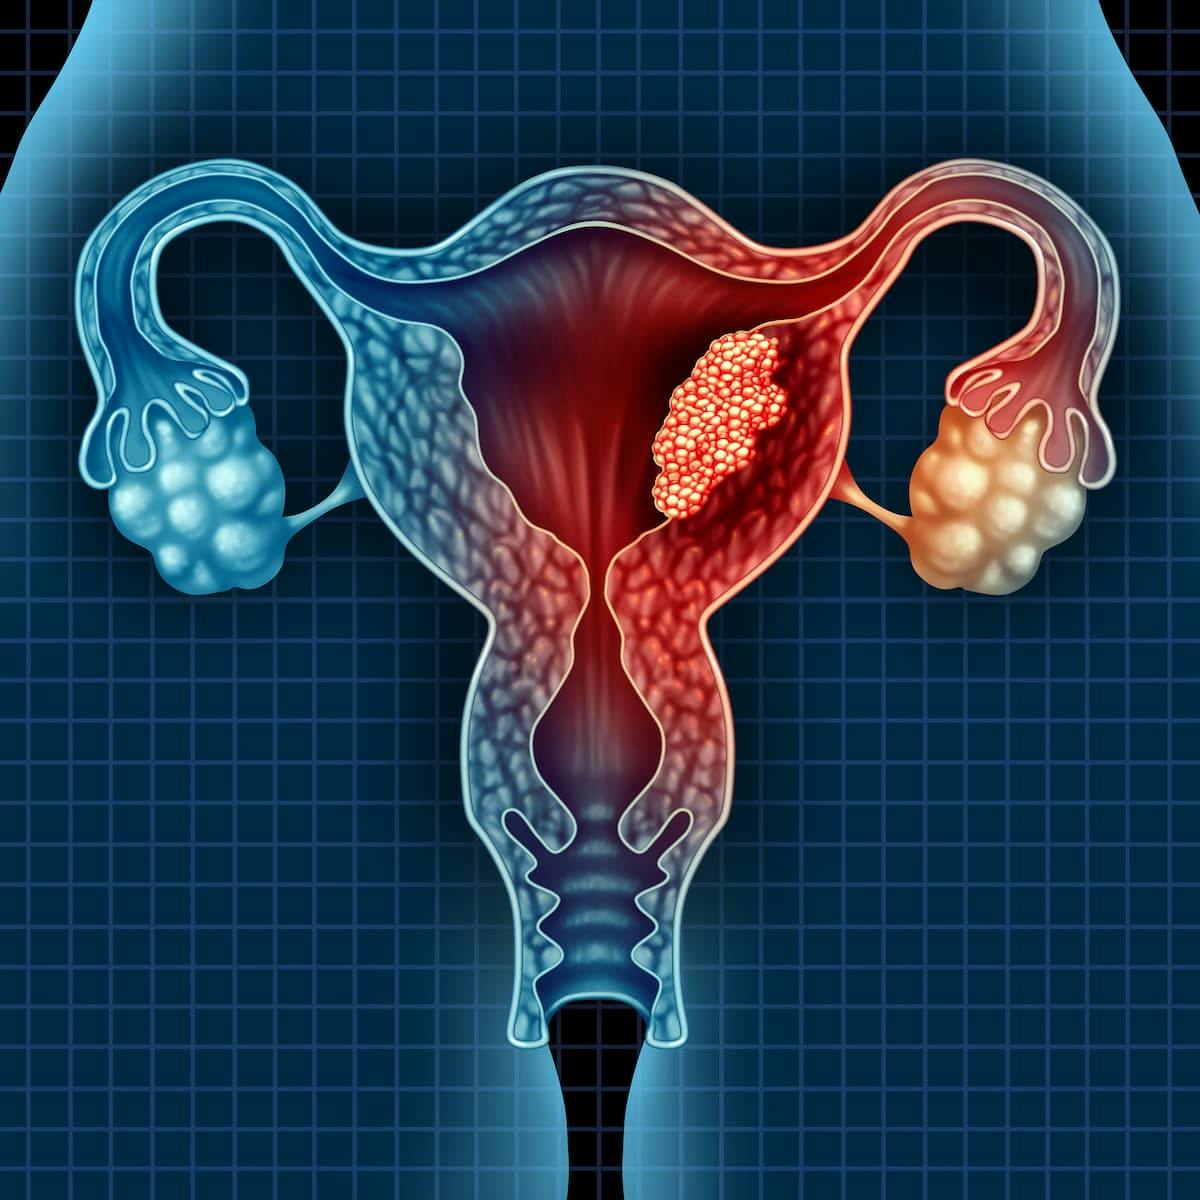 Data from the phase 3 RUBY trial may support the use of dostarlimab plus chemotherapy as a new standard of care in patients with newly diagnosed primary advanced or recurrent endometrial carcinoma.